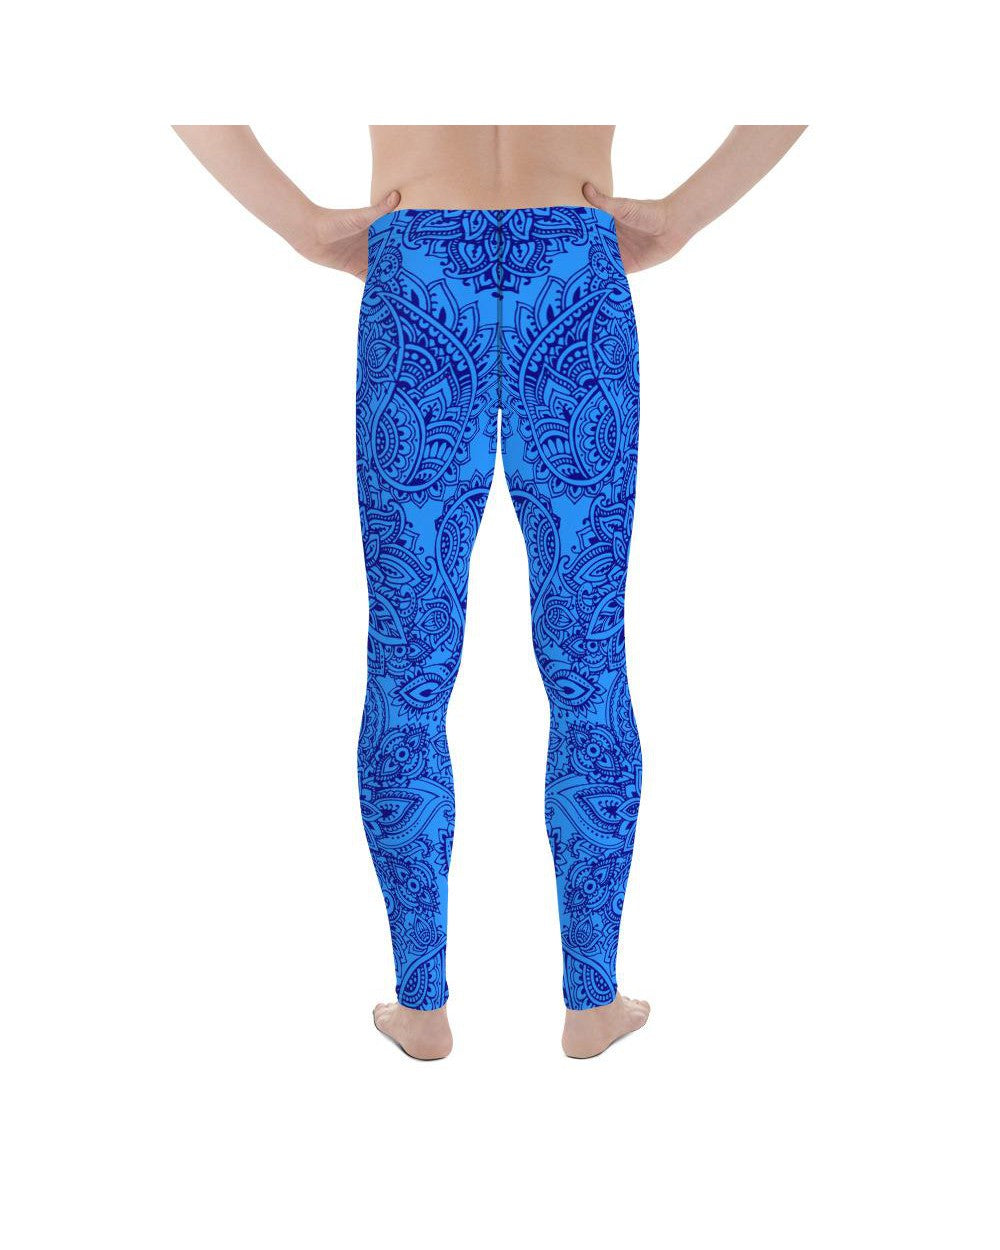 Blue and Navy Henna Tattoo Meggings Gearbunch Men's Leggings 